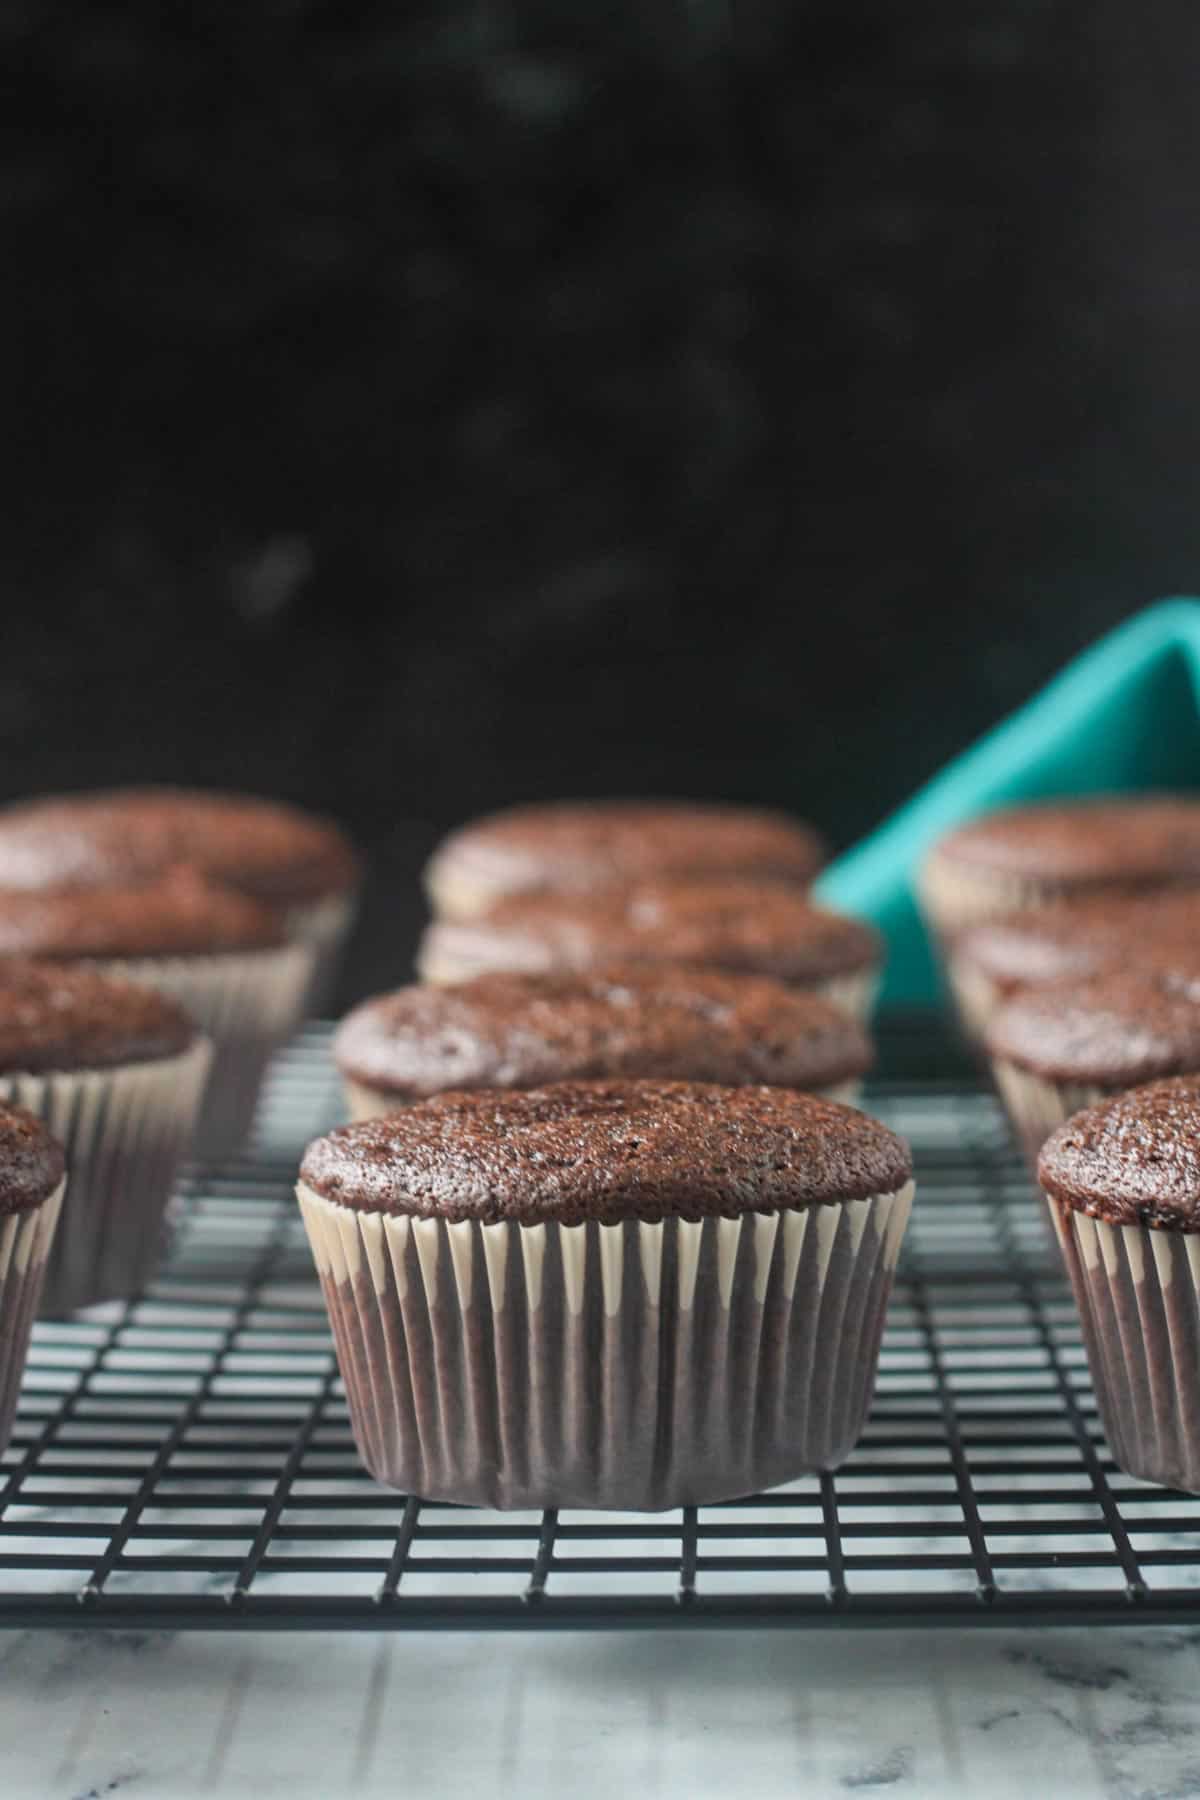 Close up of one finished chocolate cupcake in a cupcake liner on a cooling rack.